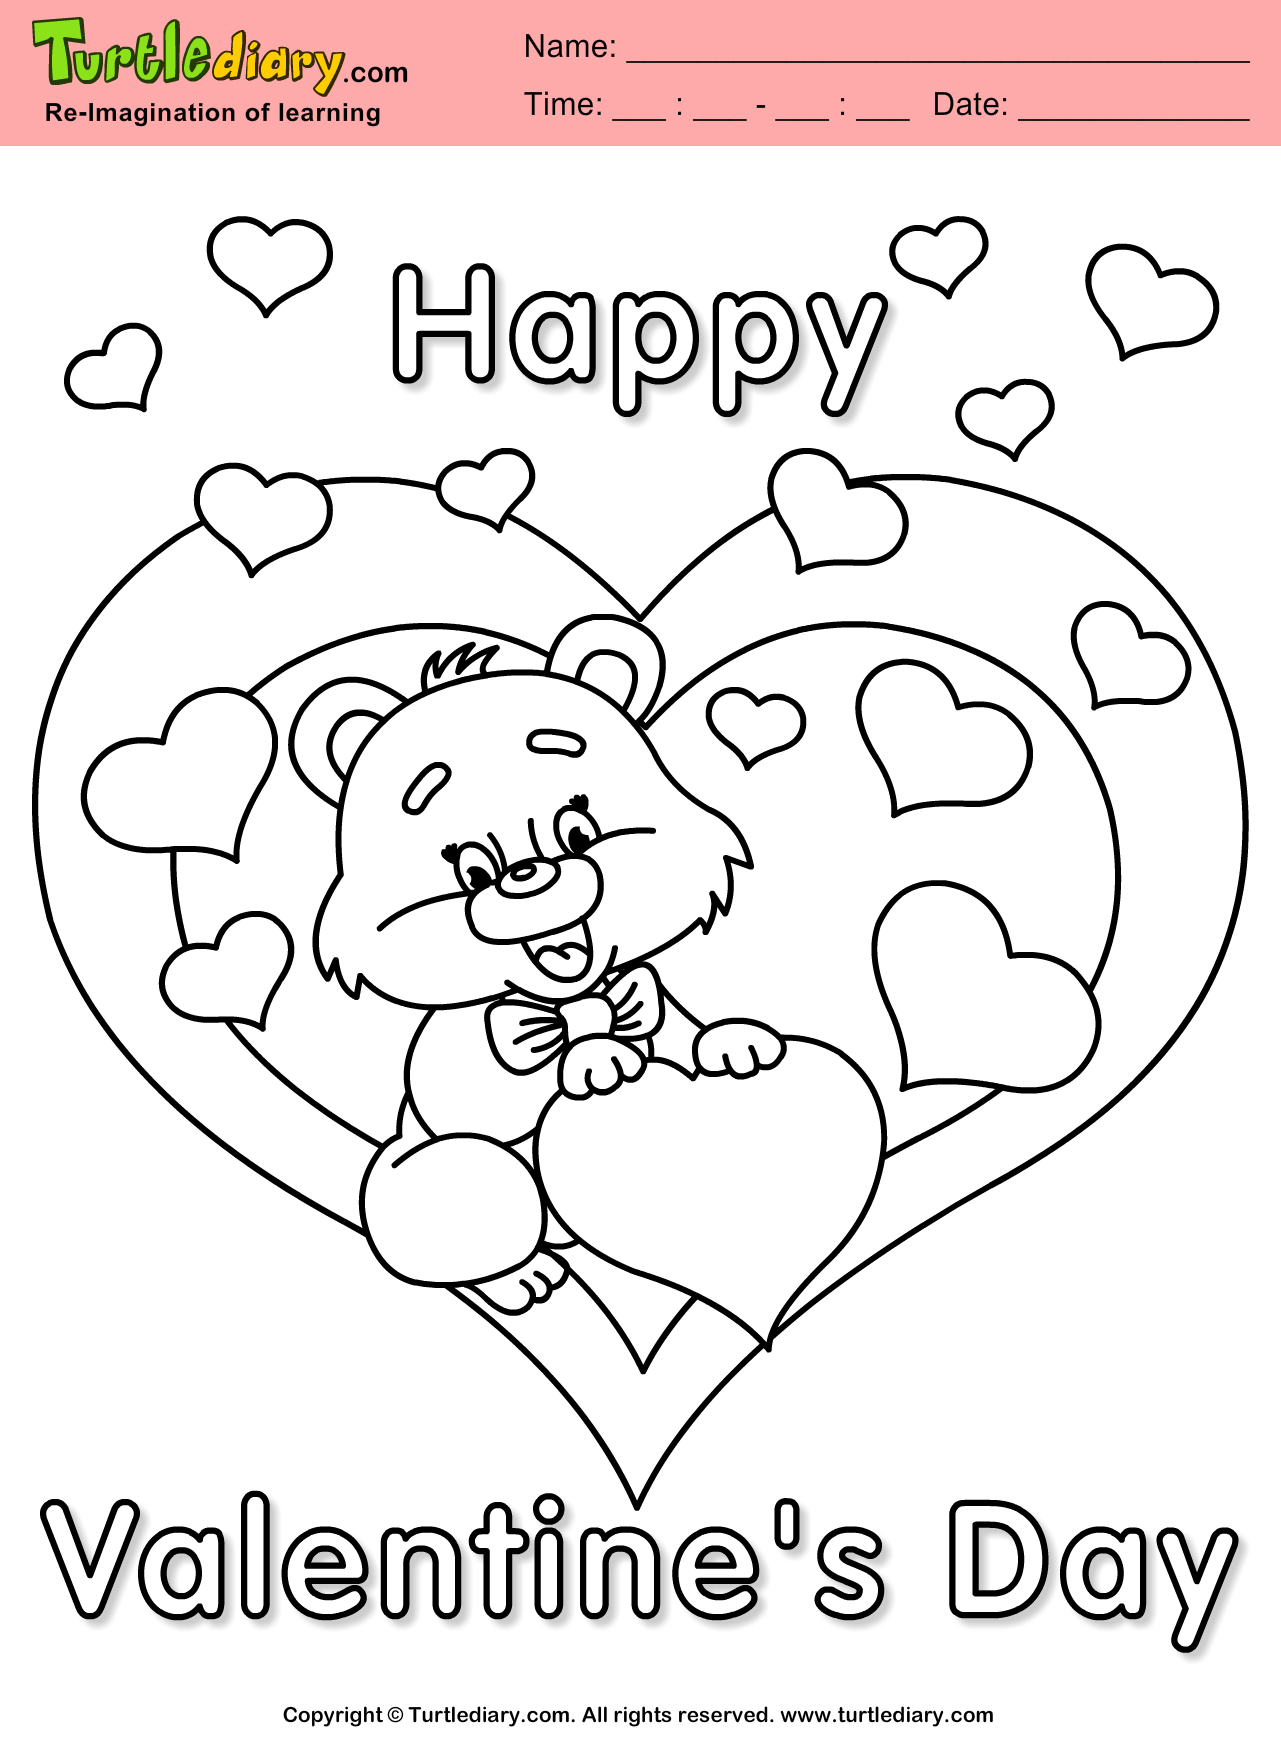 Teddy bear with heart coloring sheet turtle diary